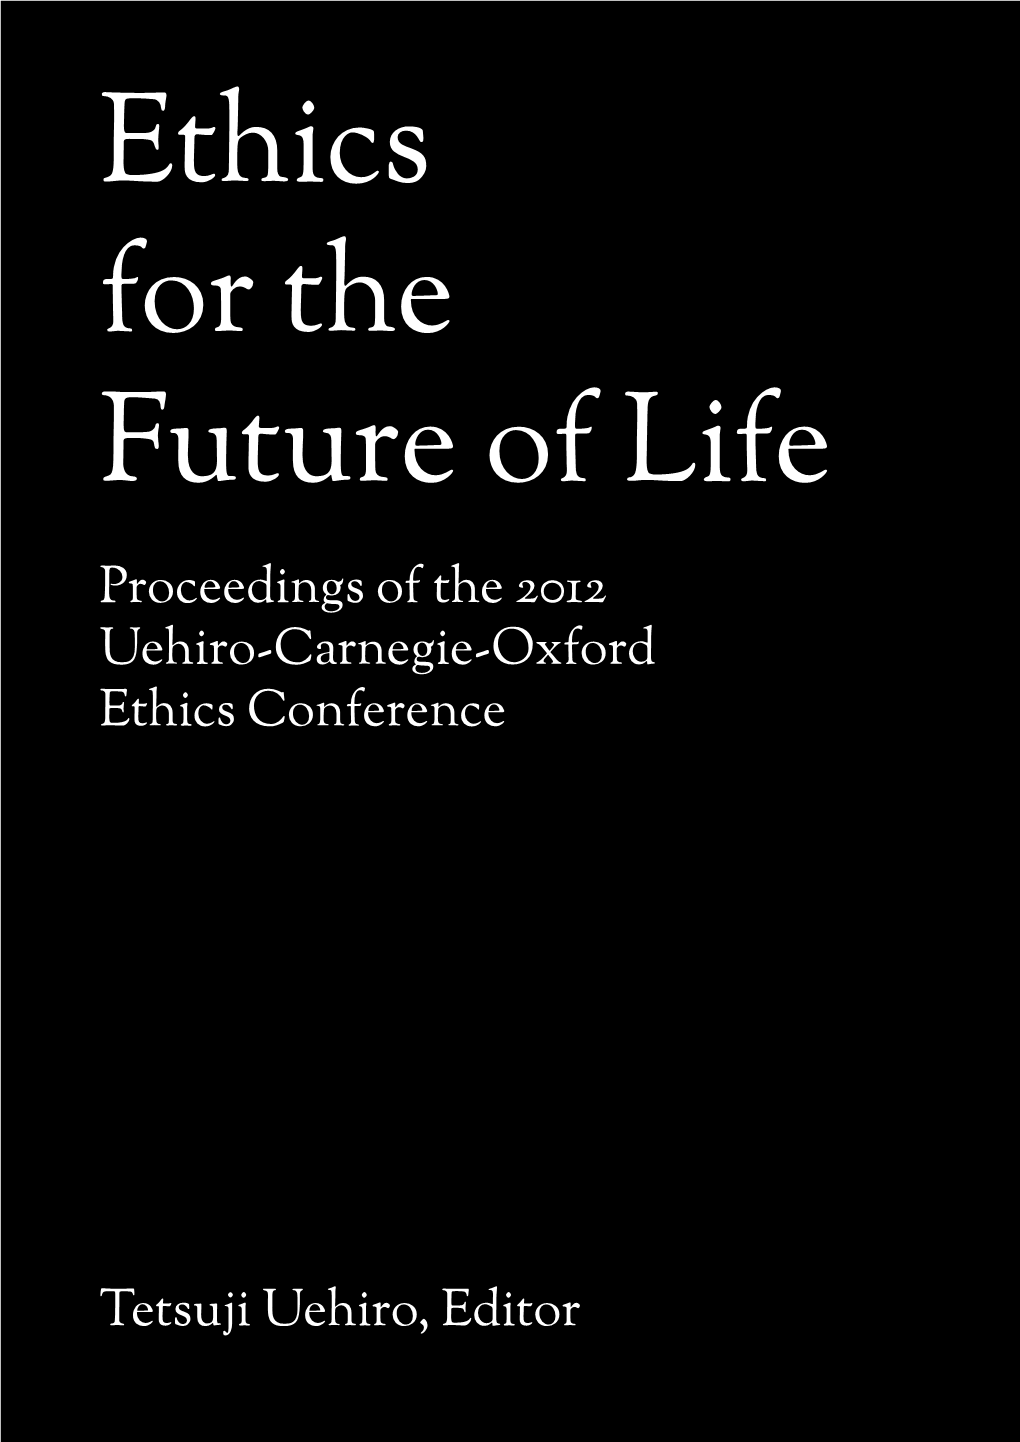 Proceedings of the 2012 Uehiro-Carnegie-Oxford Ethics Conference